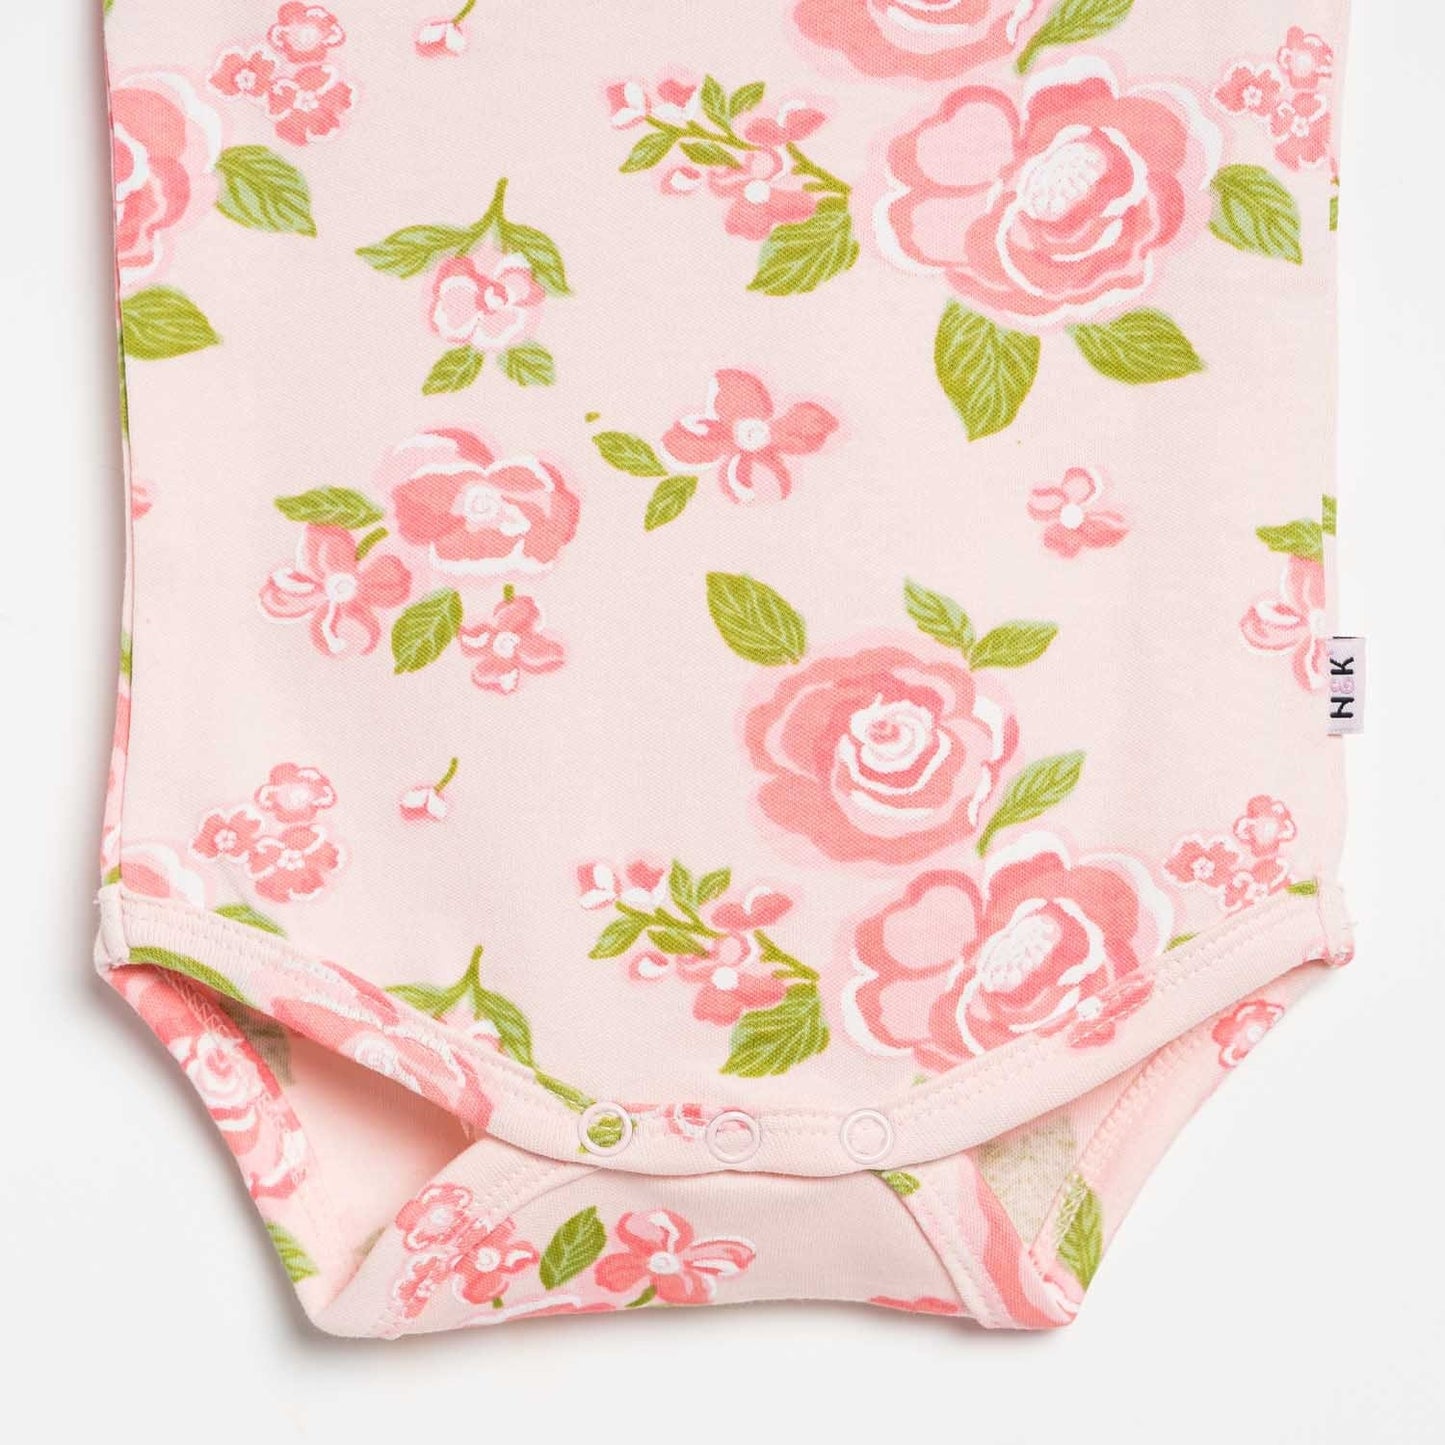 Baby Girl Pink Blush Short Sleeve Onesies Pack of 2 Collection